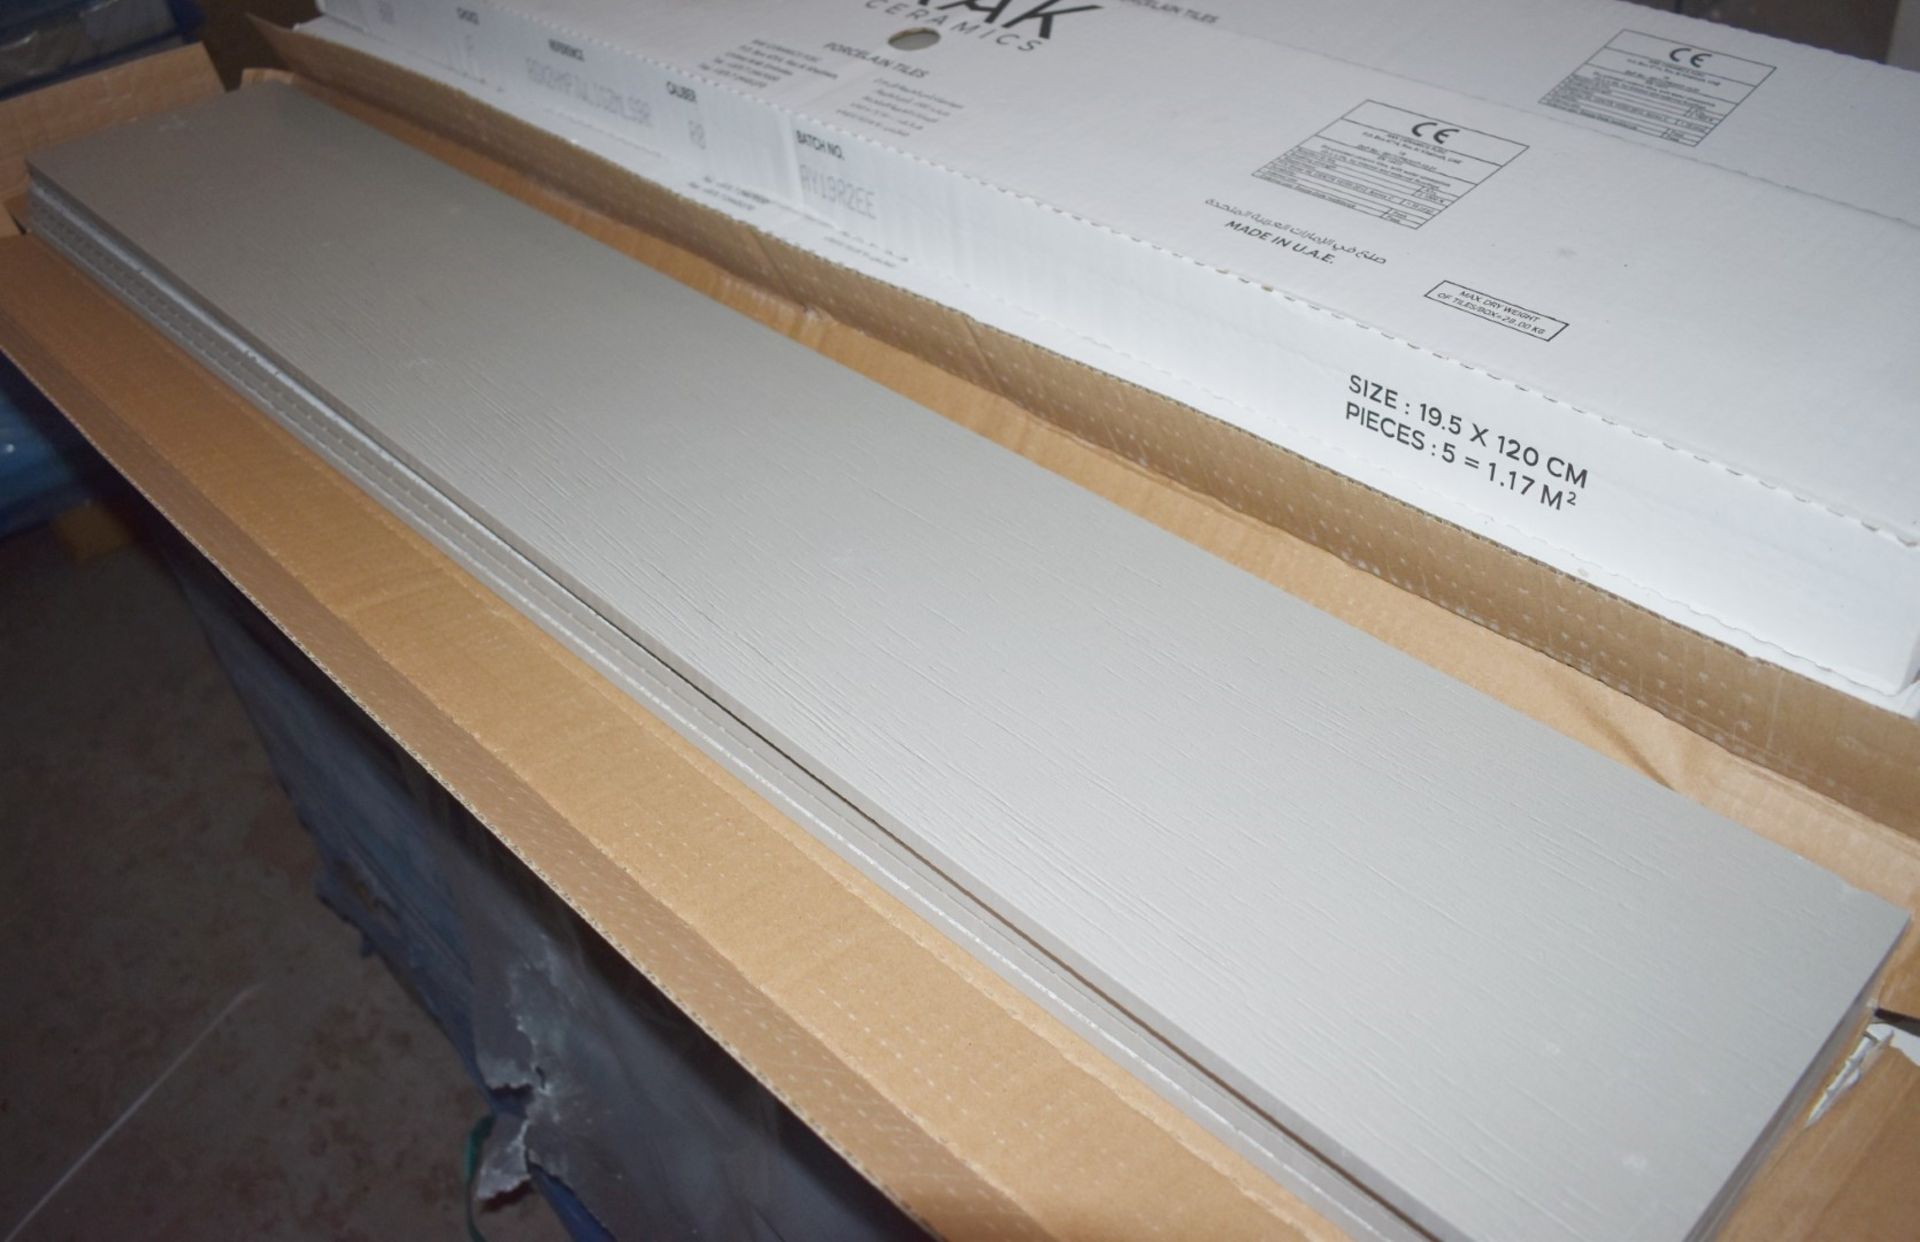 12 x Boxes of RAK Porcelain Floor or Wall Tiles - M Project Wood Design in Light Grey - 19.5 x 120 c - Image 7 of 7